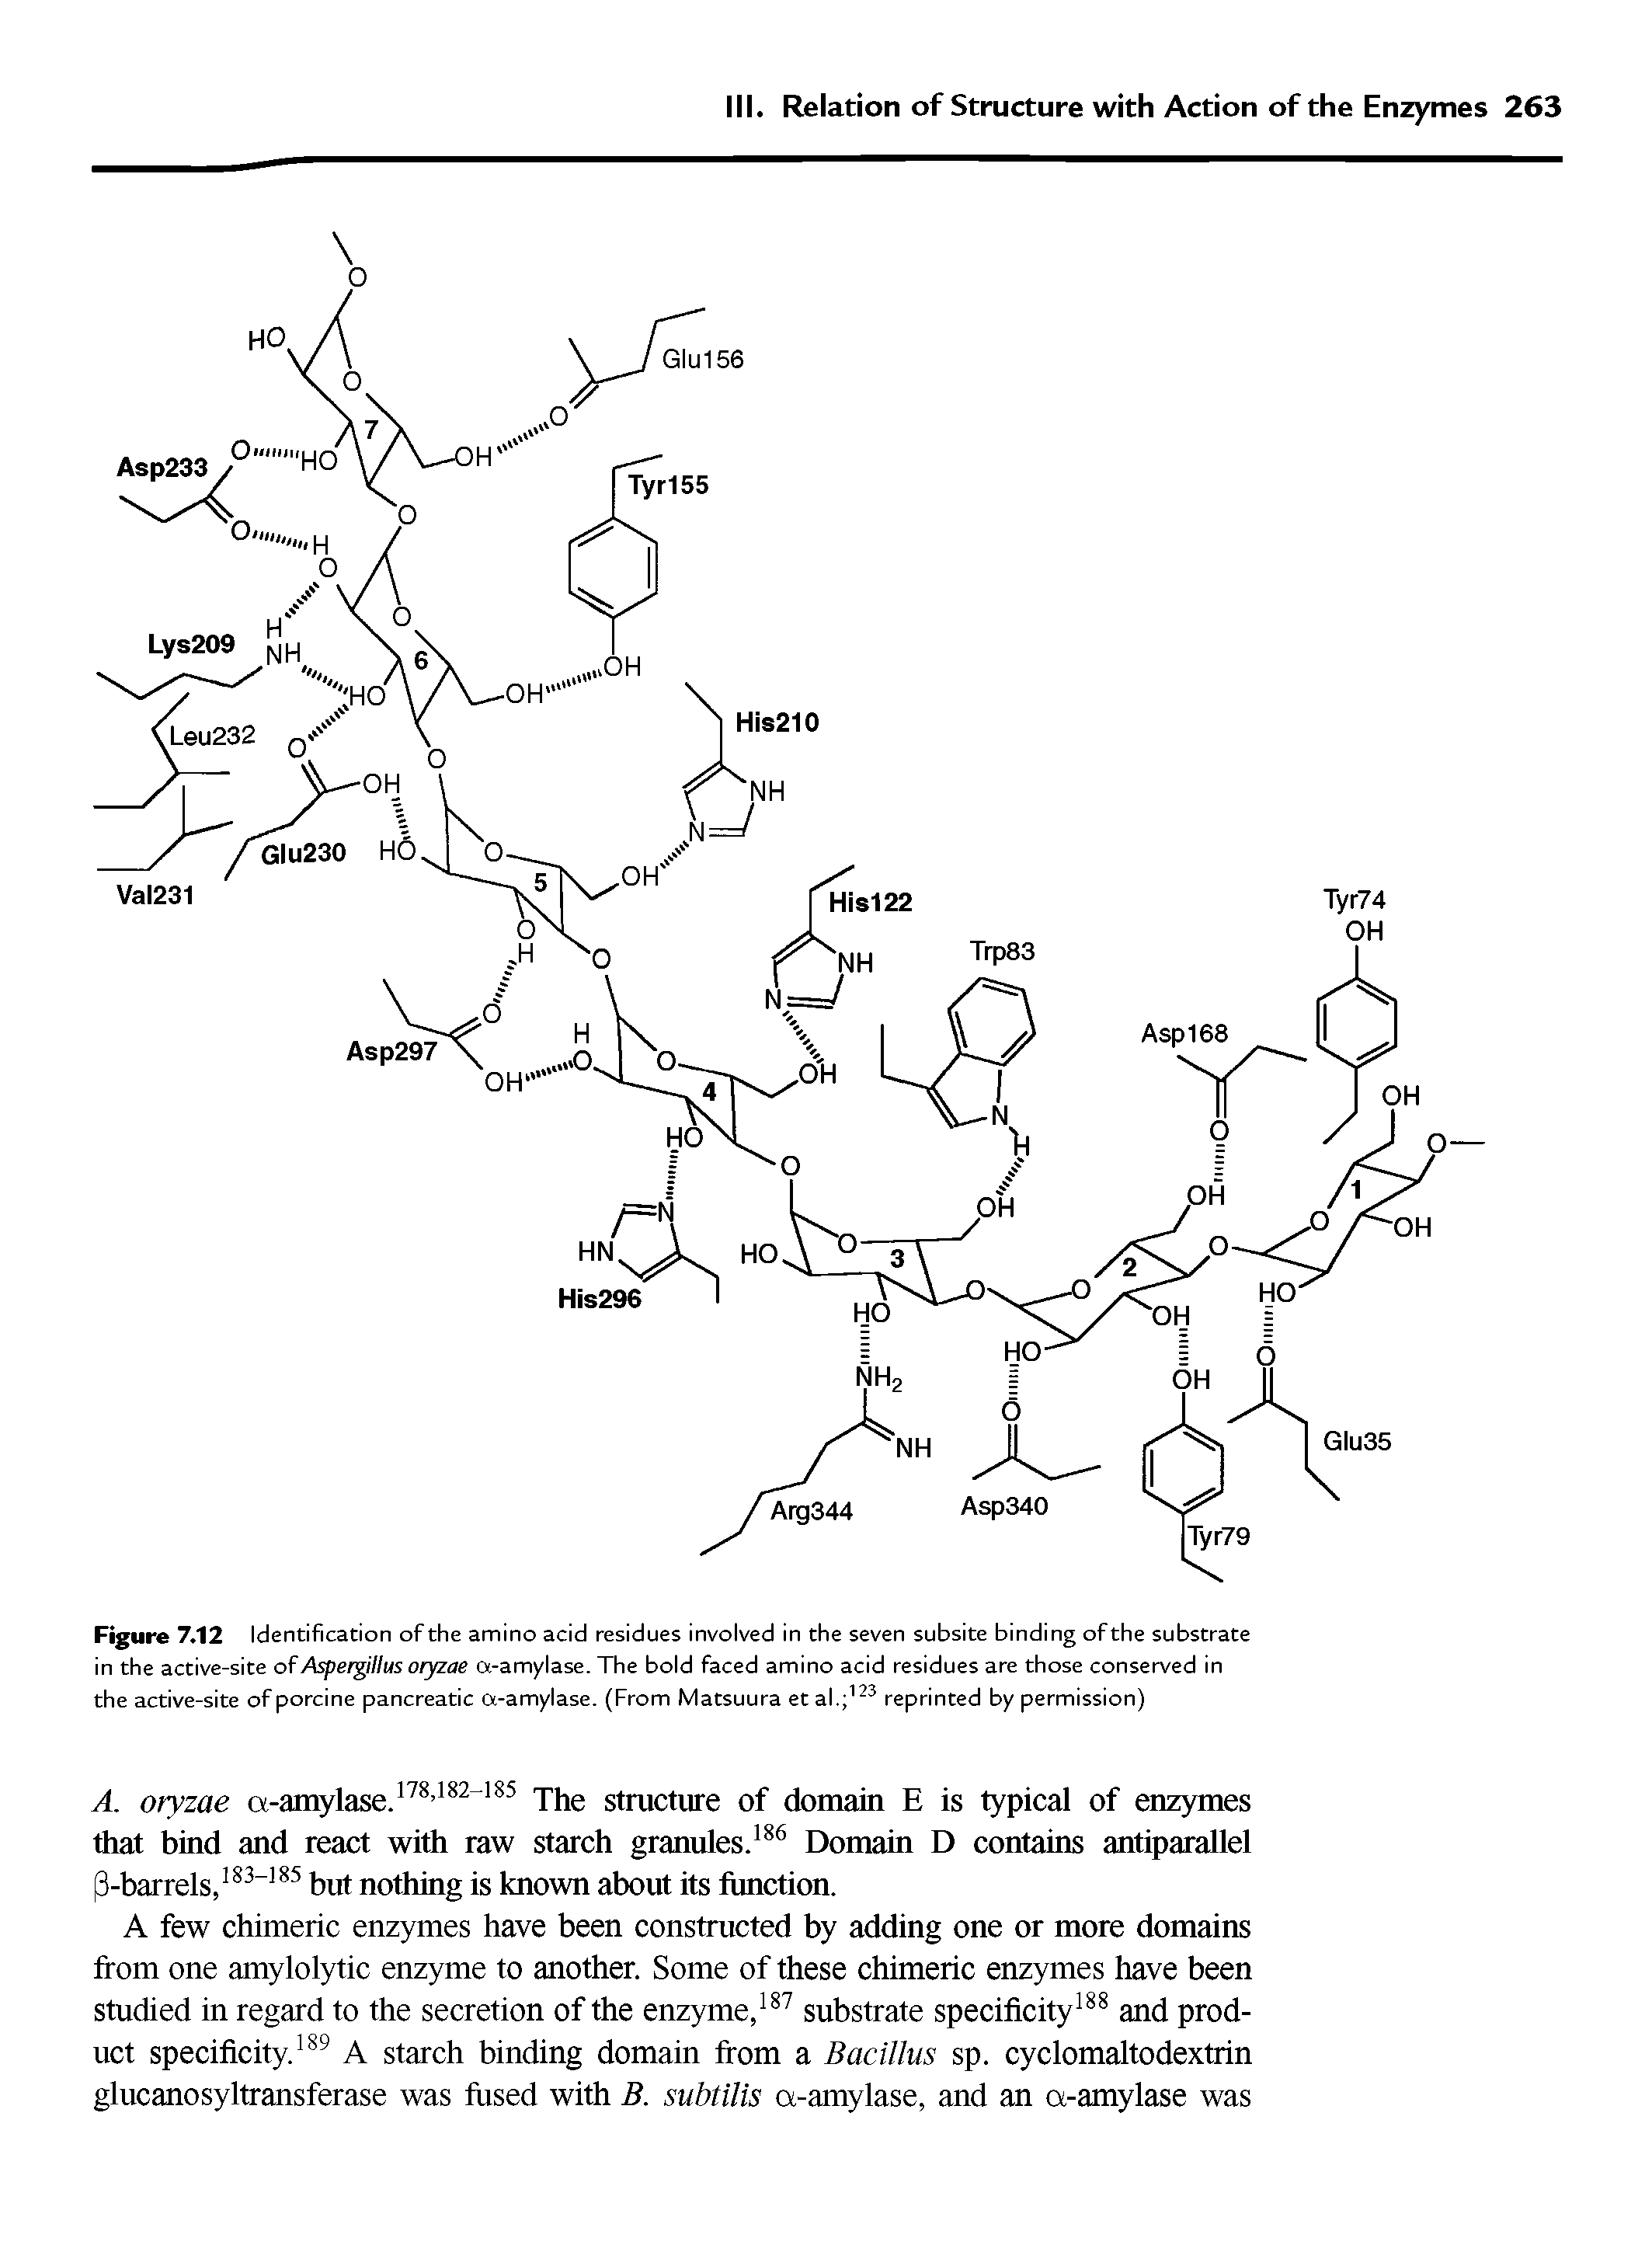 Figure 7.12 Identification of the amino acid residues involved in the seven subsite binding of the substrate in the active-site of Aspergillus oryzae a-amylase. The bold faced amino acid residues are those conserved in the active-site of porcine pancreatic a-amylase. (From Matsuura et al. 123 reprinted by permission)...